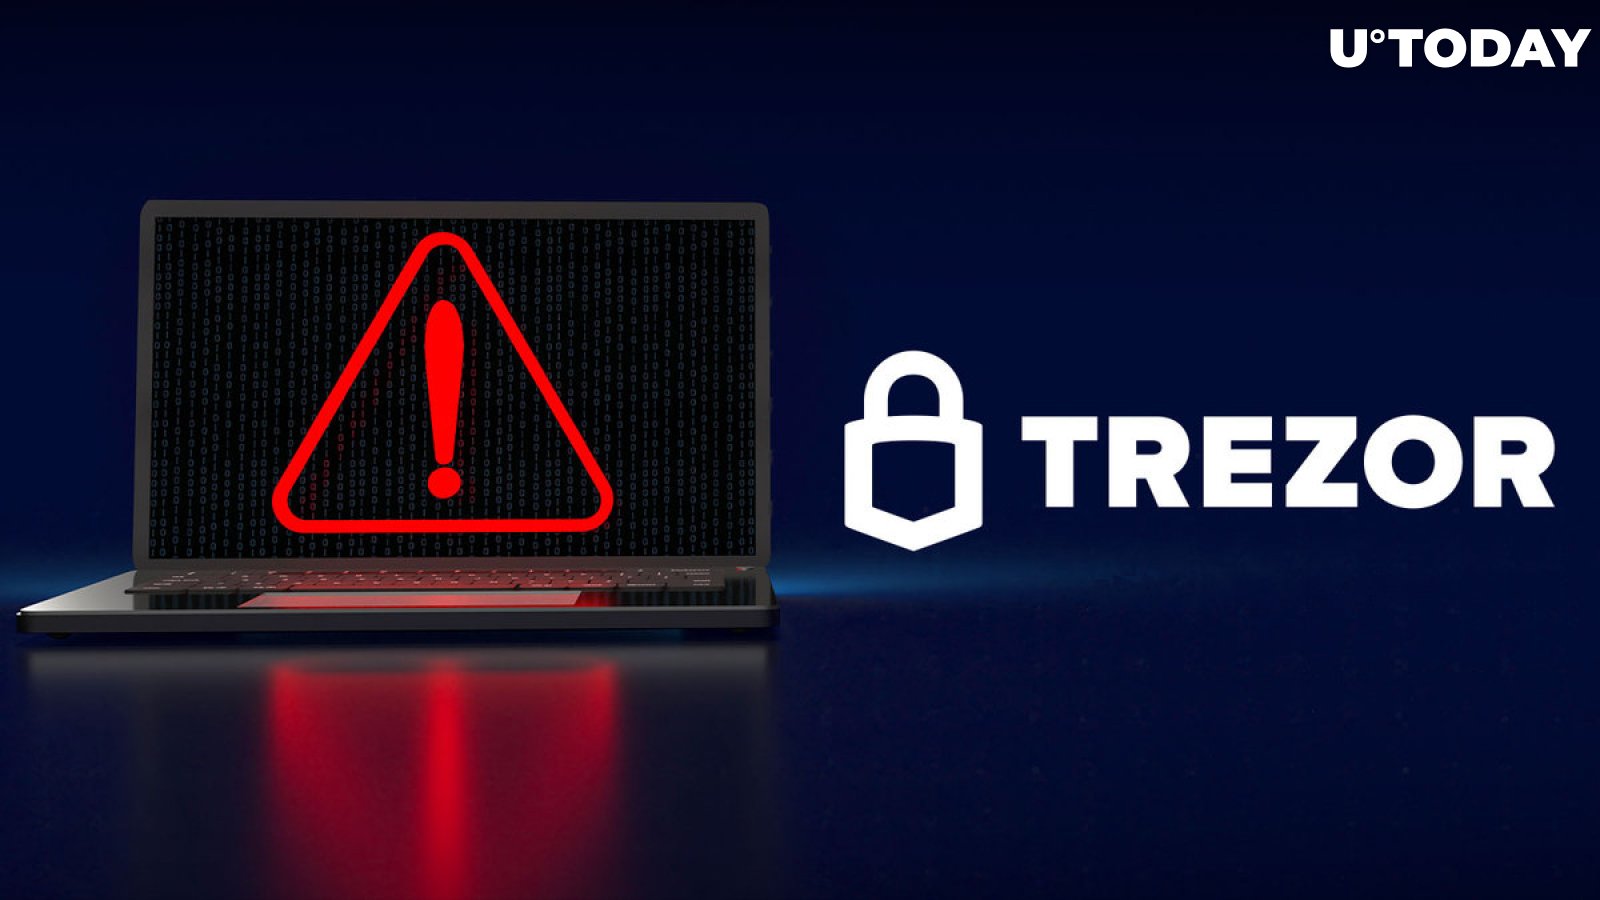 Trezor Issues Important Warning: What's Happened?